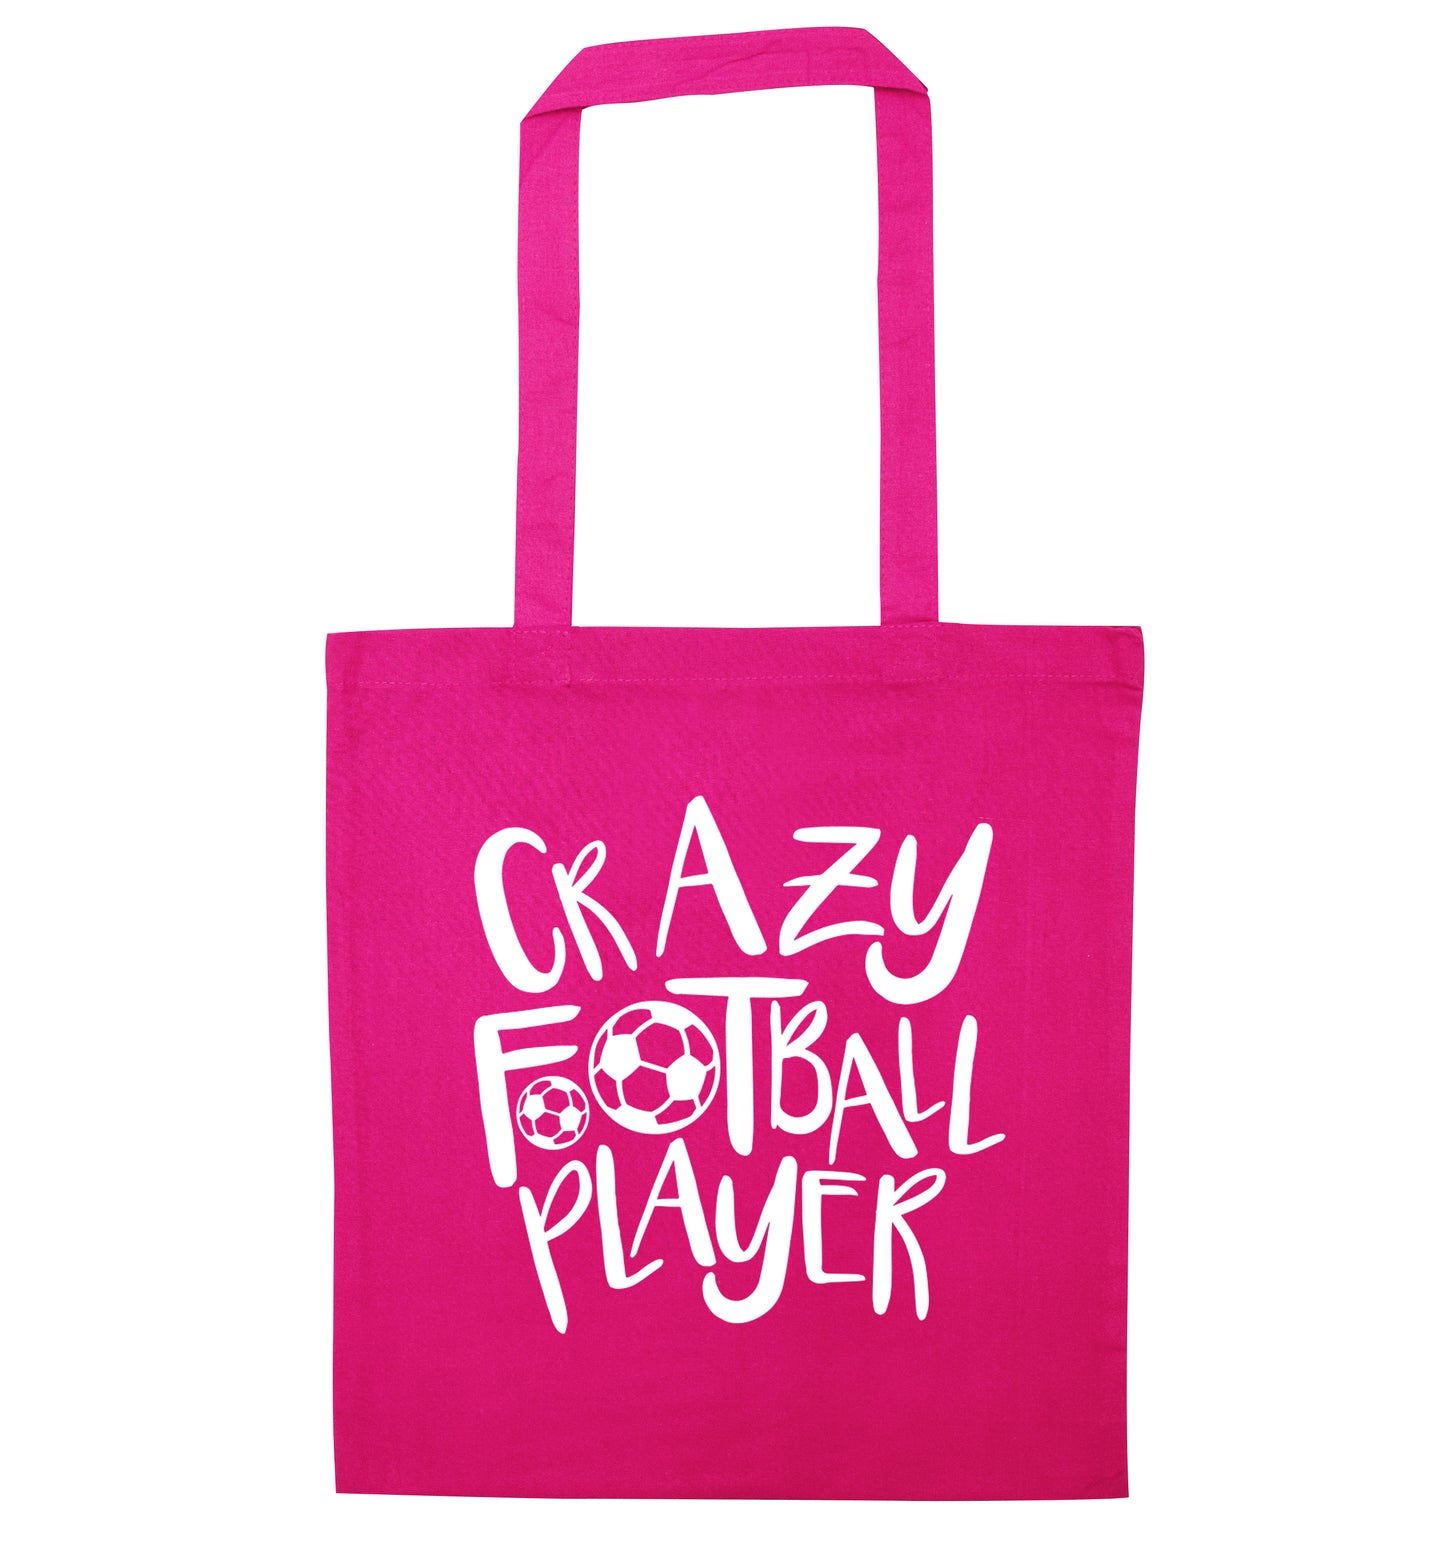 Crazy football player pink tote bag